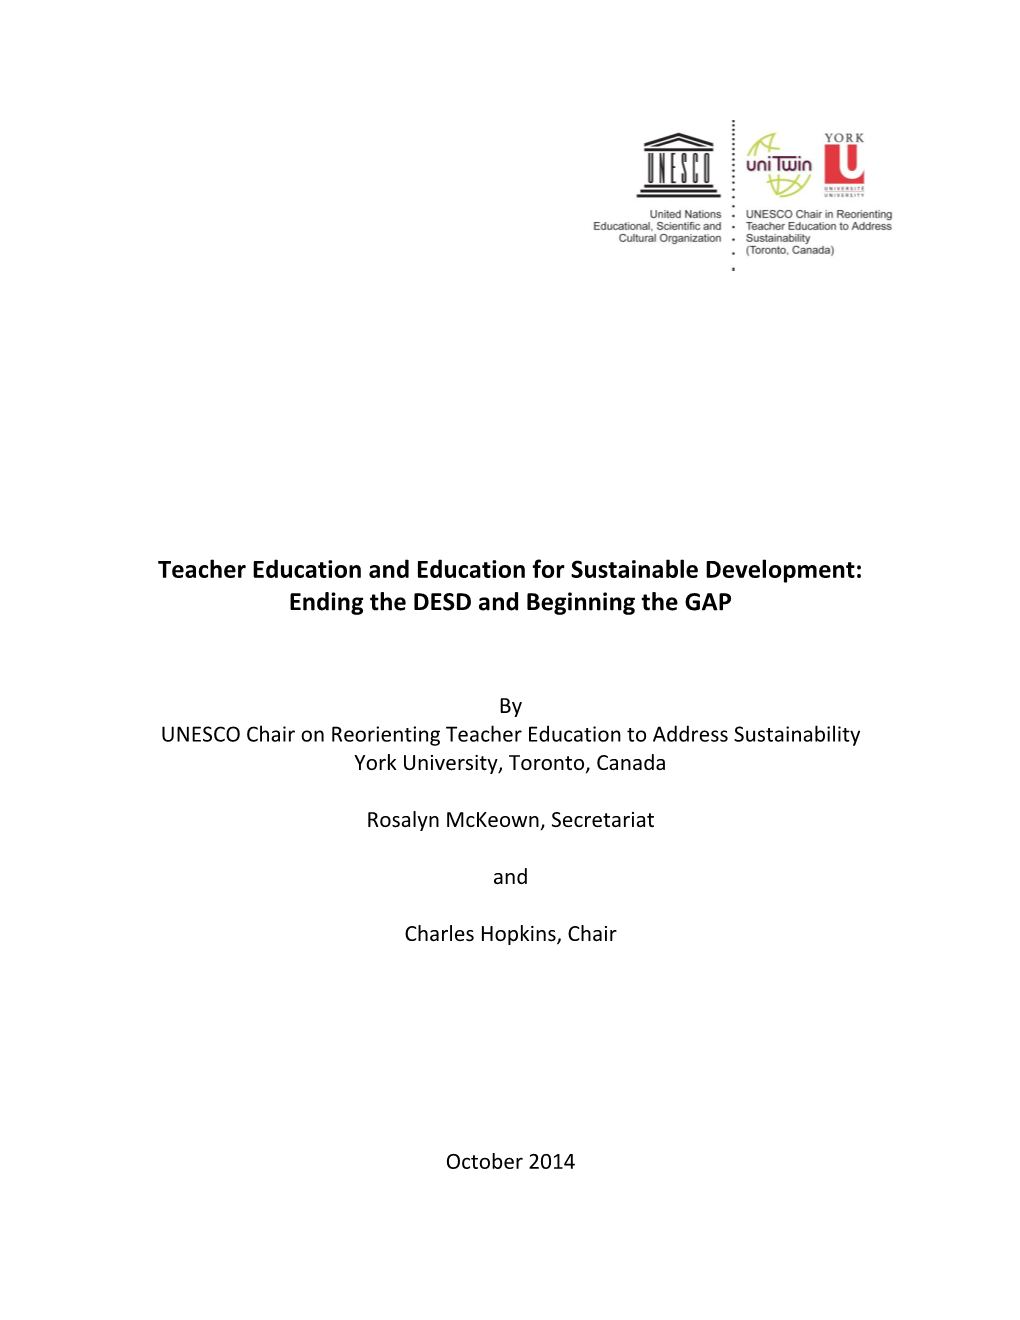 Teacher Education and Education for Sustainable Development: Ending the DESD and Beginning the GAP